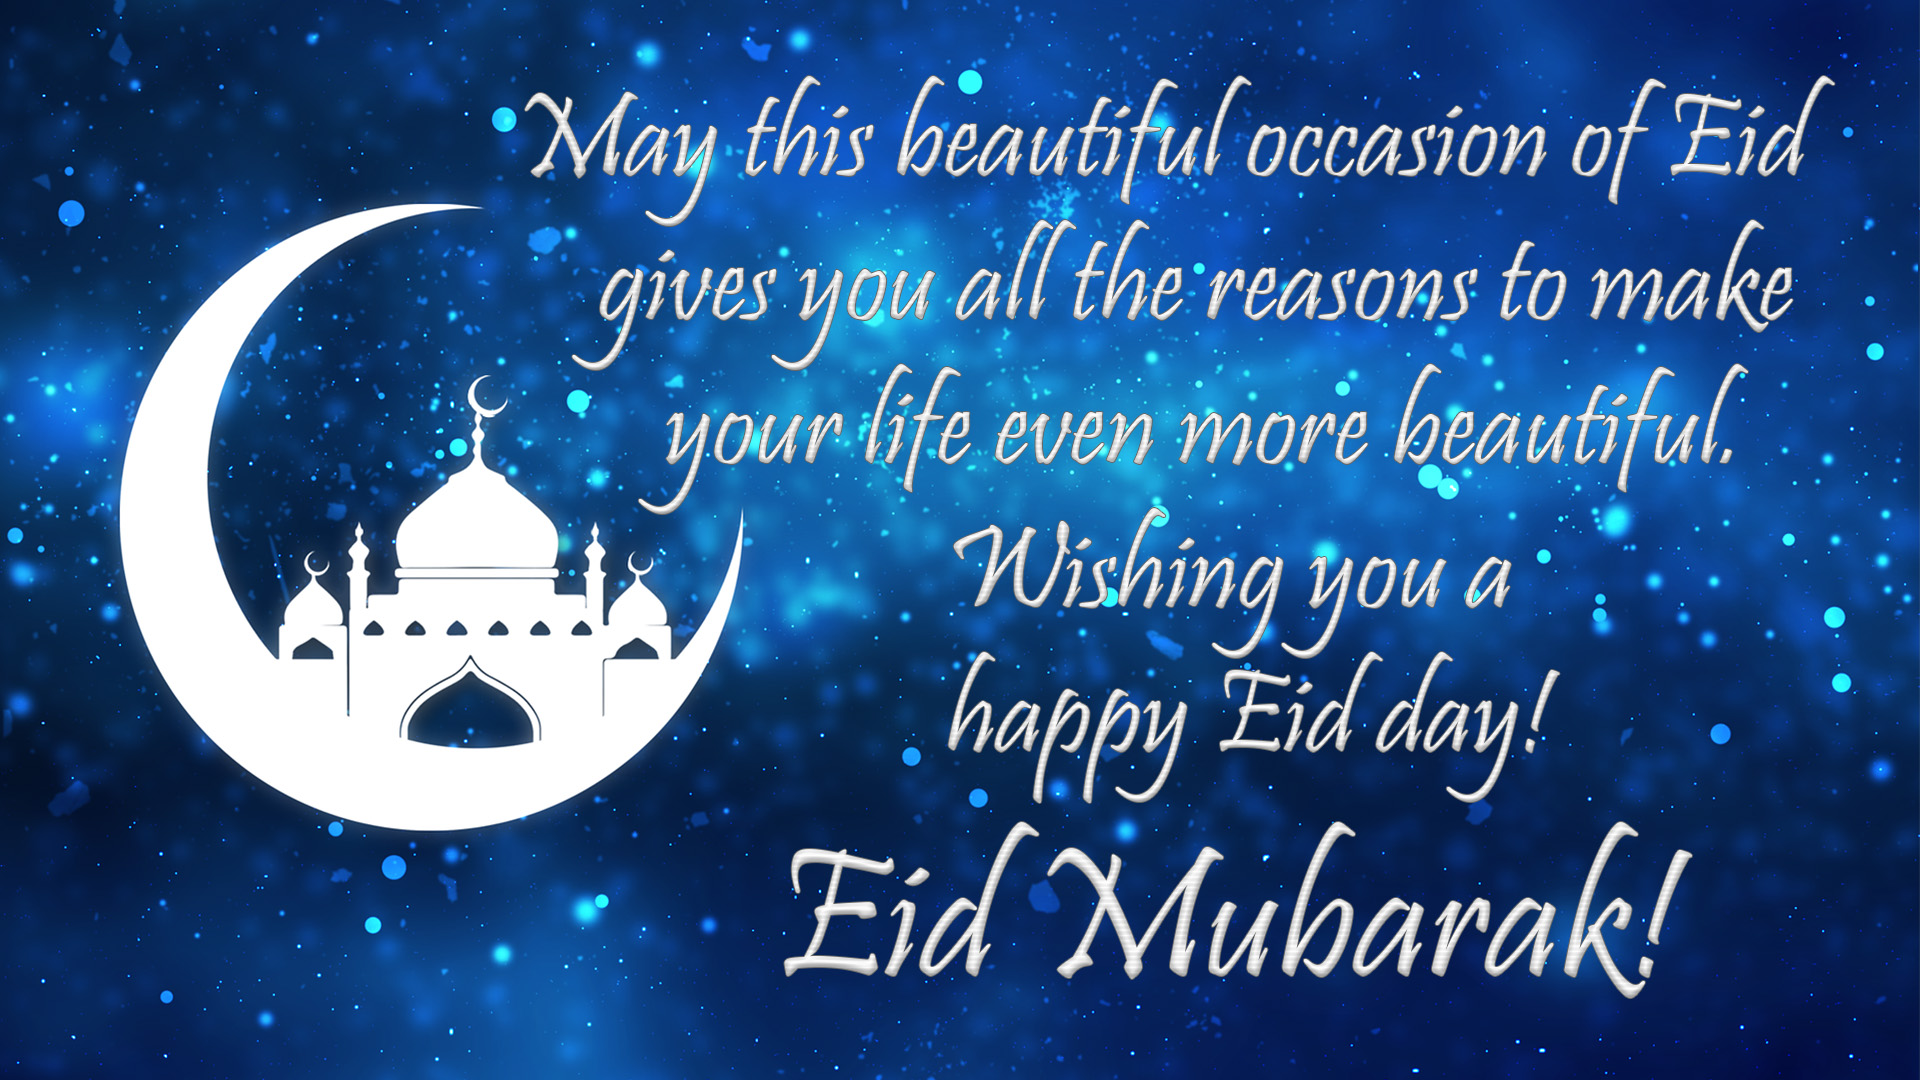 Eid Mubarak Wishes, Quotes & Greeting Cards Images